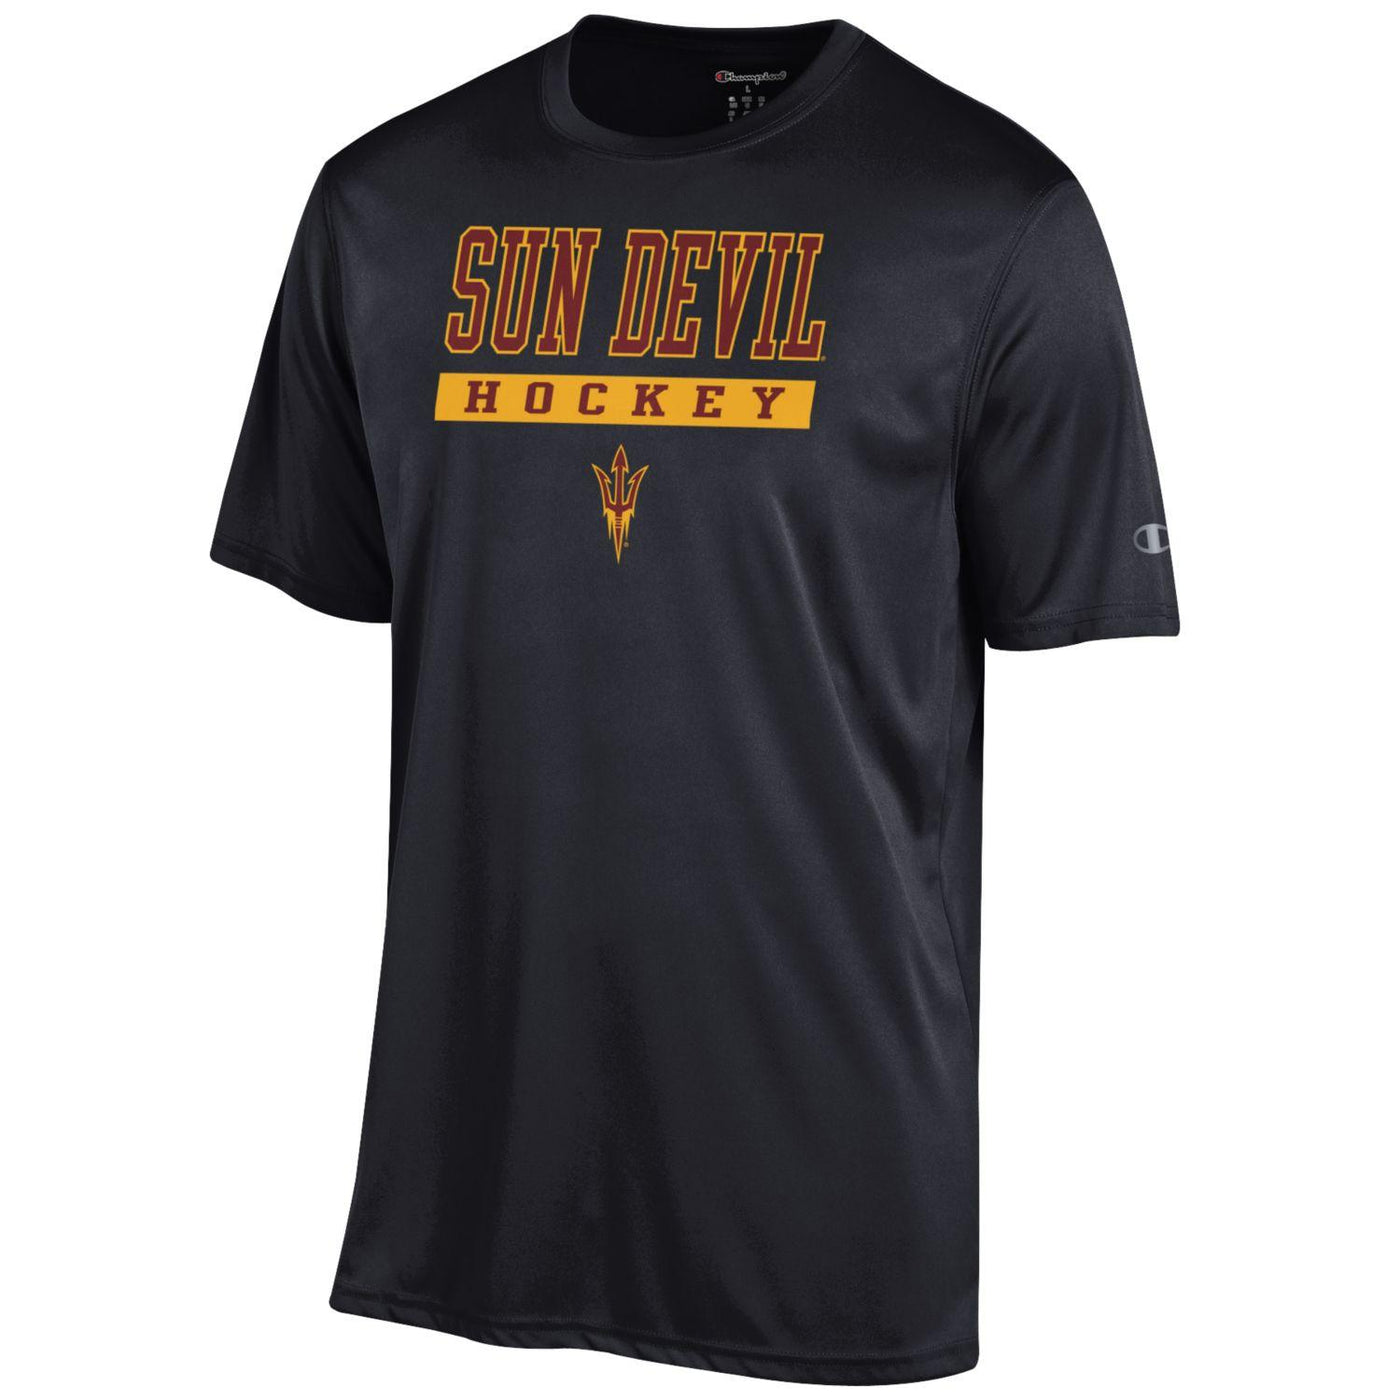 ASU black athletic tee with 'Sun Devil Hockey' lettering above a pitchfork